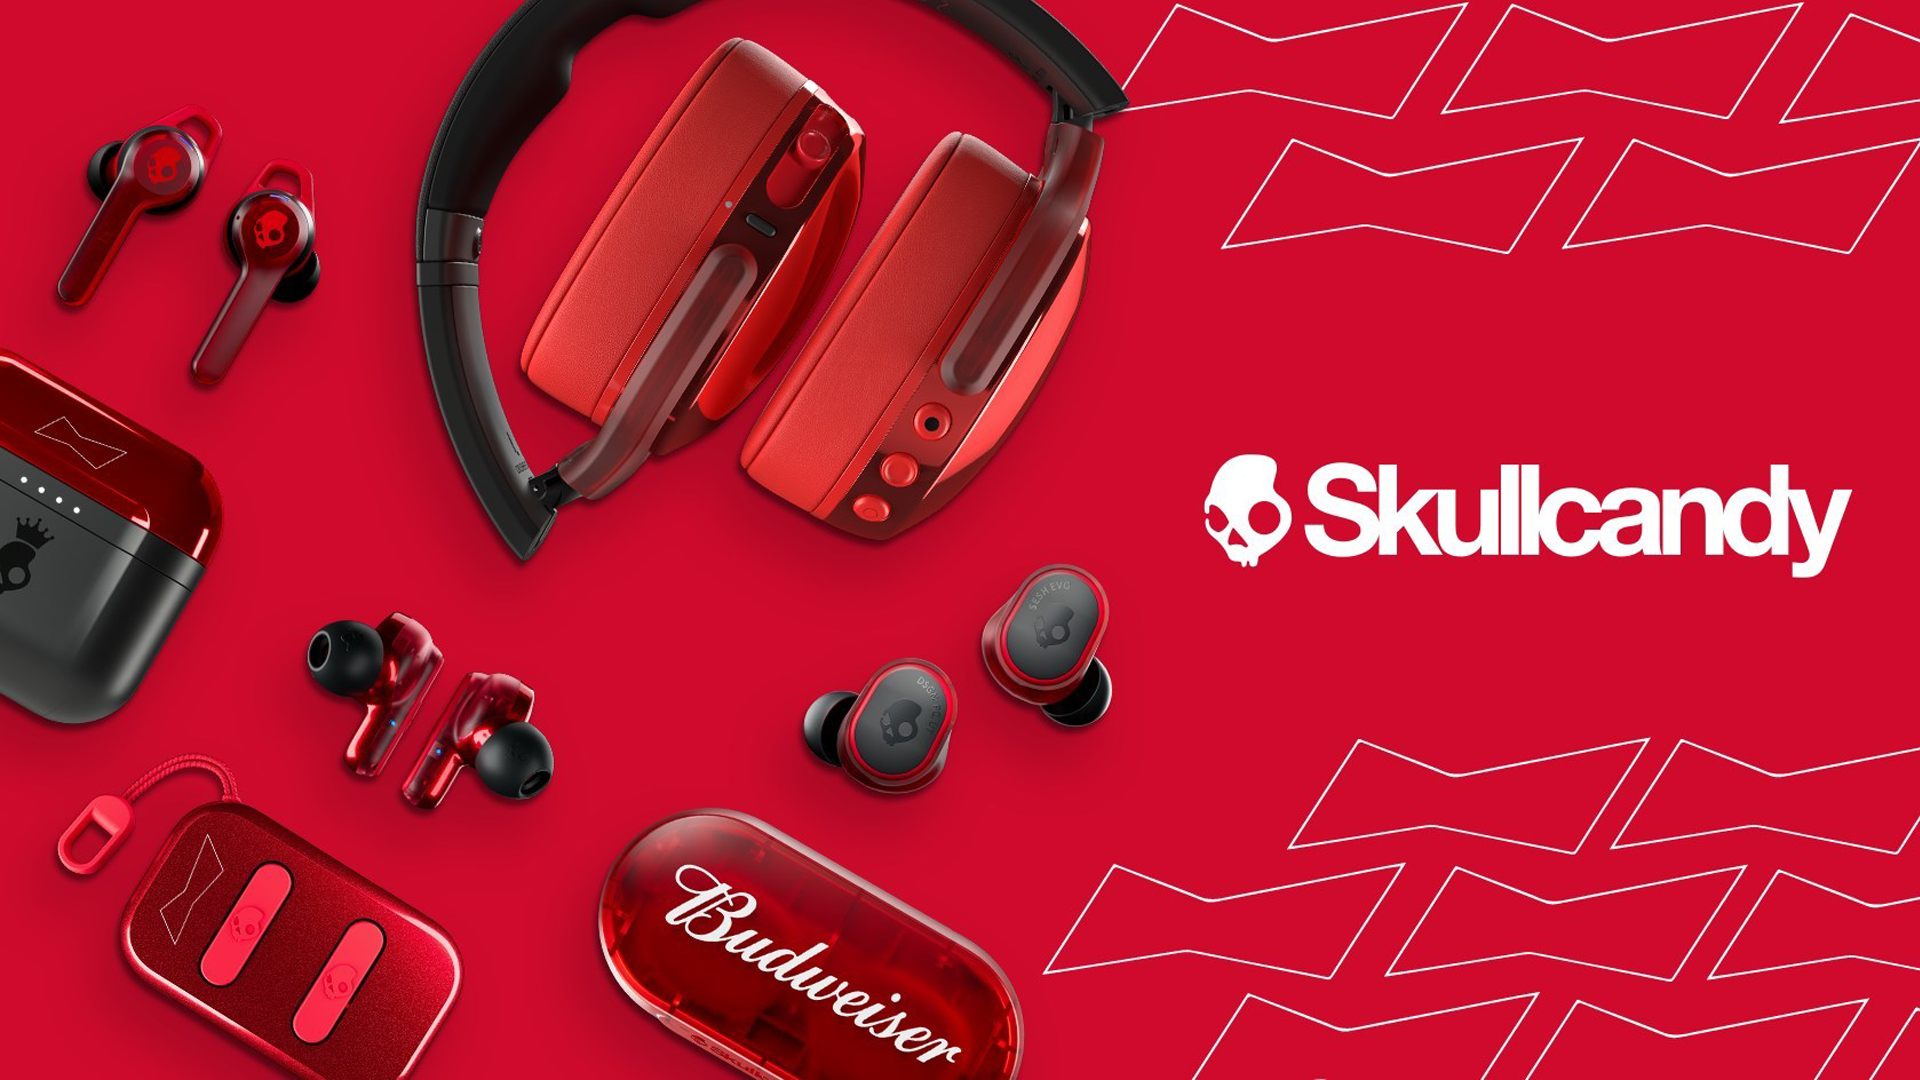 The New Skullcandy x Budweiser Collaboration is Red Hot – Review Geek